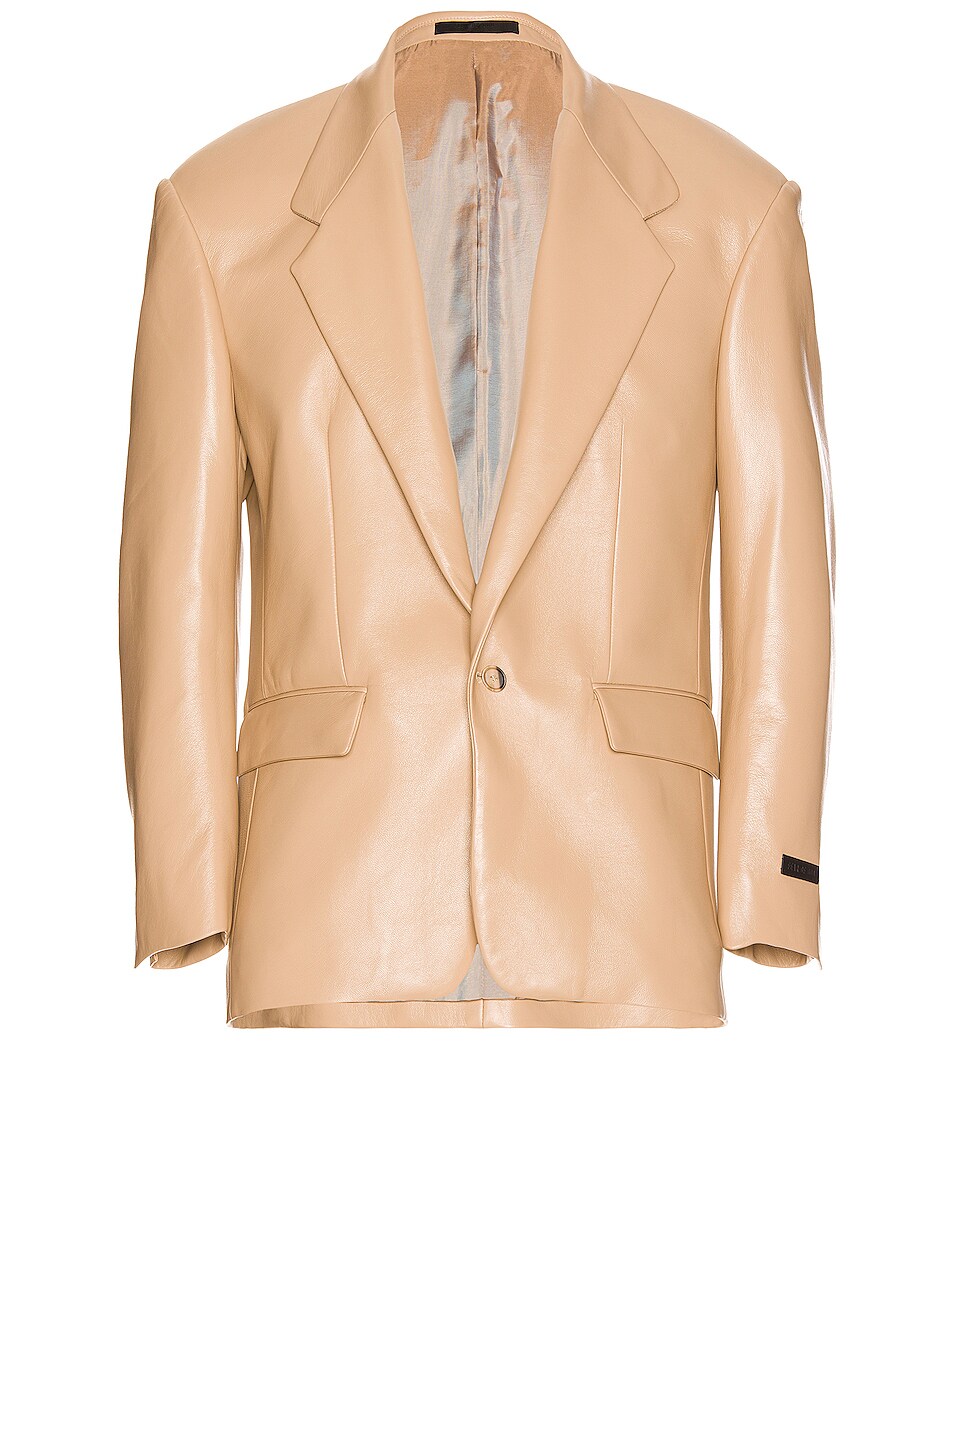 Image 1 of Fear of God Leather Blazer in Tan